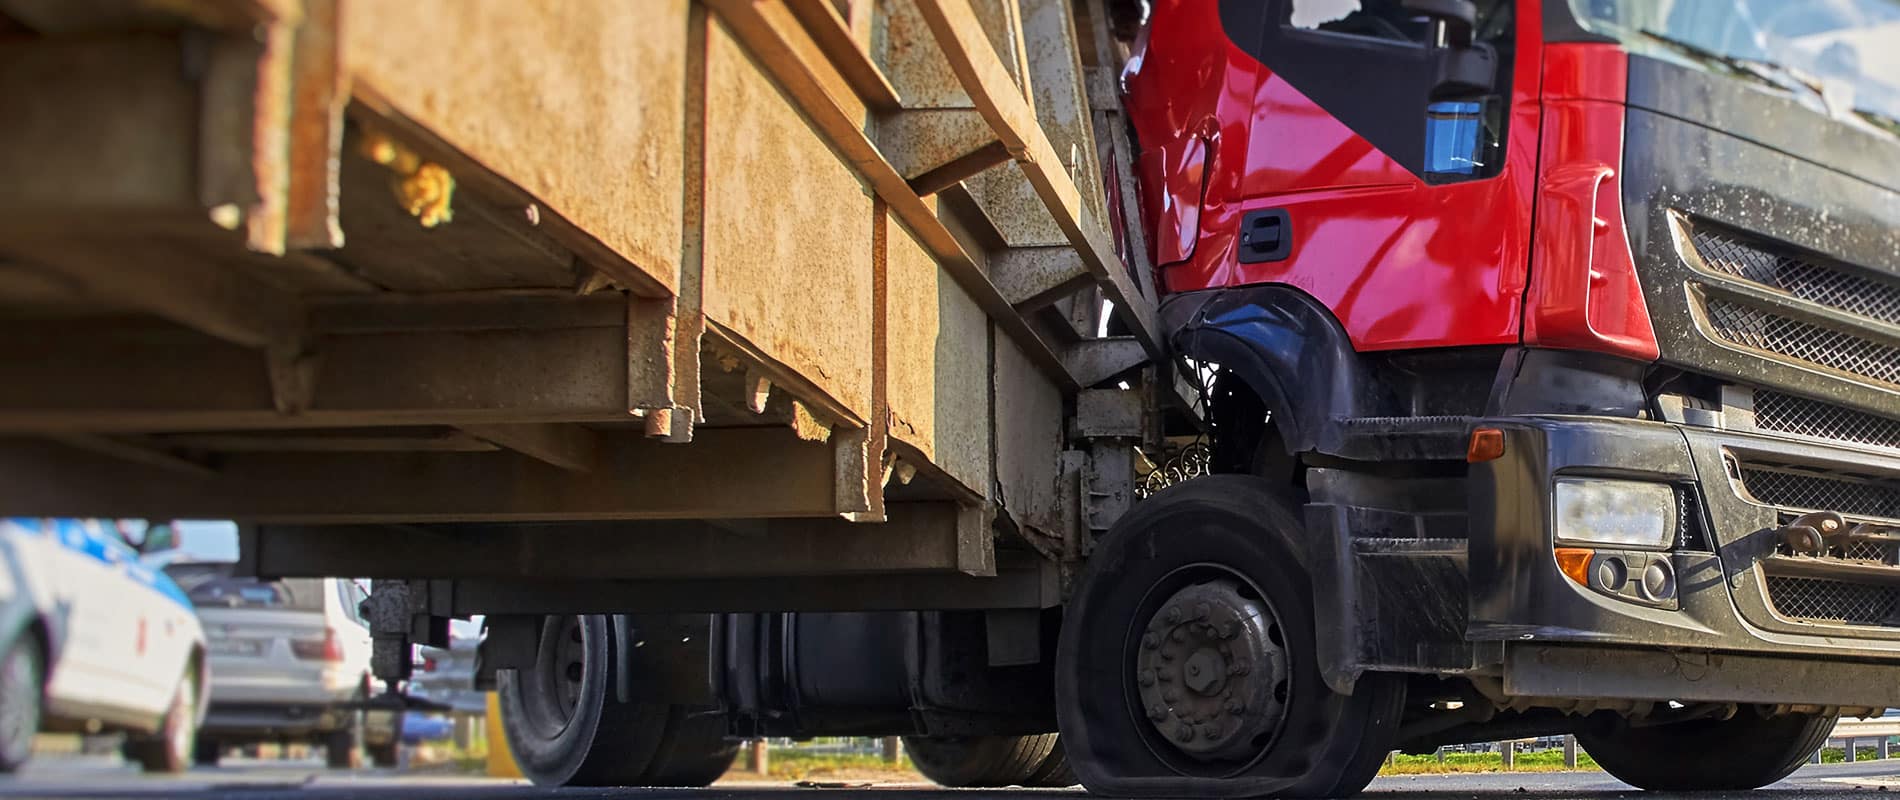 TEXAS COMMERCIAL VEHICLE ACCIDENT